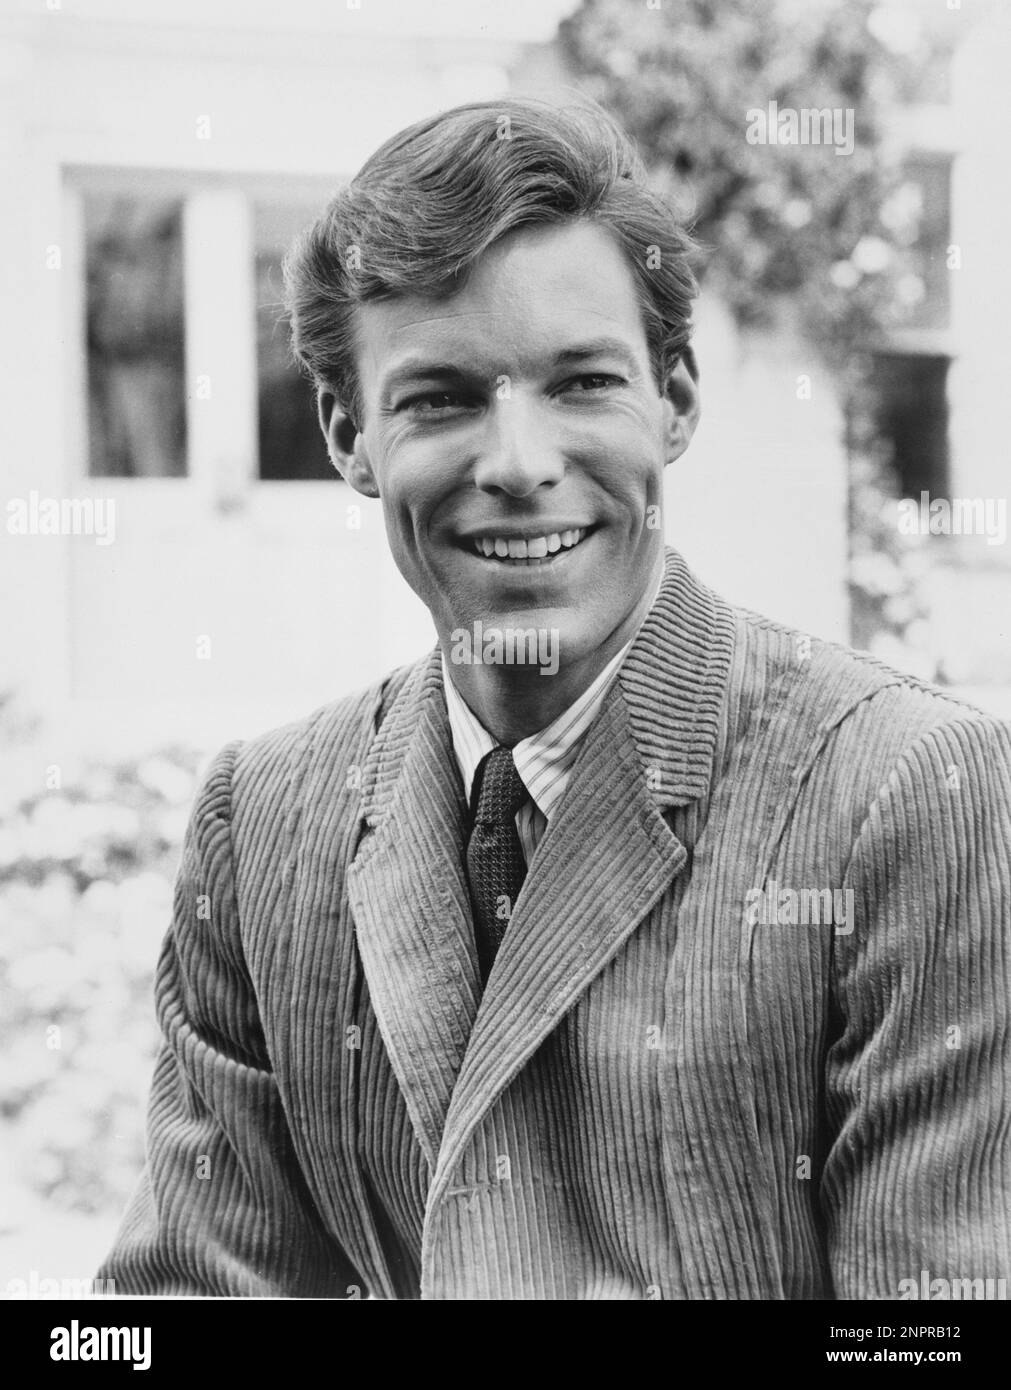 1963 ca. : L'attore RICHARD CHAMBERLAIN (Beverly Hills, Los Angeles, 31 marzo 1934) in TV Series Dr. KILDARE ( 1961 - 1966 ) By Jack Arnold - FILM - CINEMA - TELEVISIONE - TELEVISIONE - ritrato - ritratto - sorriso - sorriso - velluto - velluto - cravatta - GAY - omosessualità - omosessuale - omosessuale - omosessualità --- Archivio GBB Foto Stock